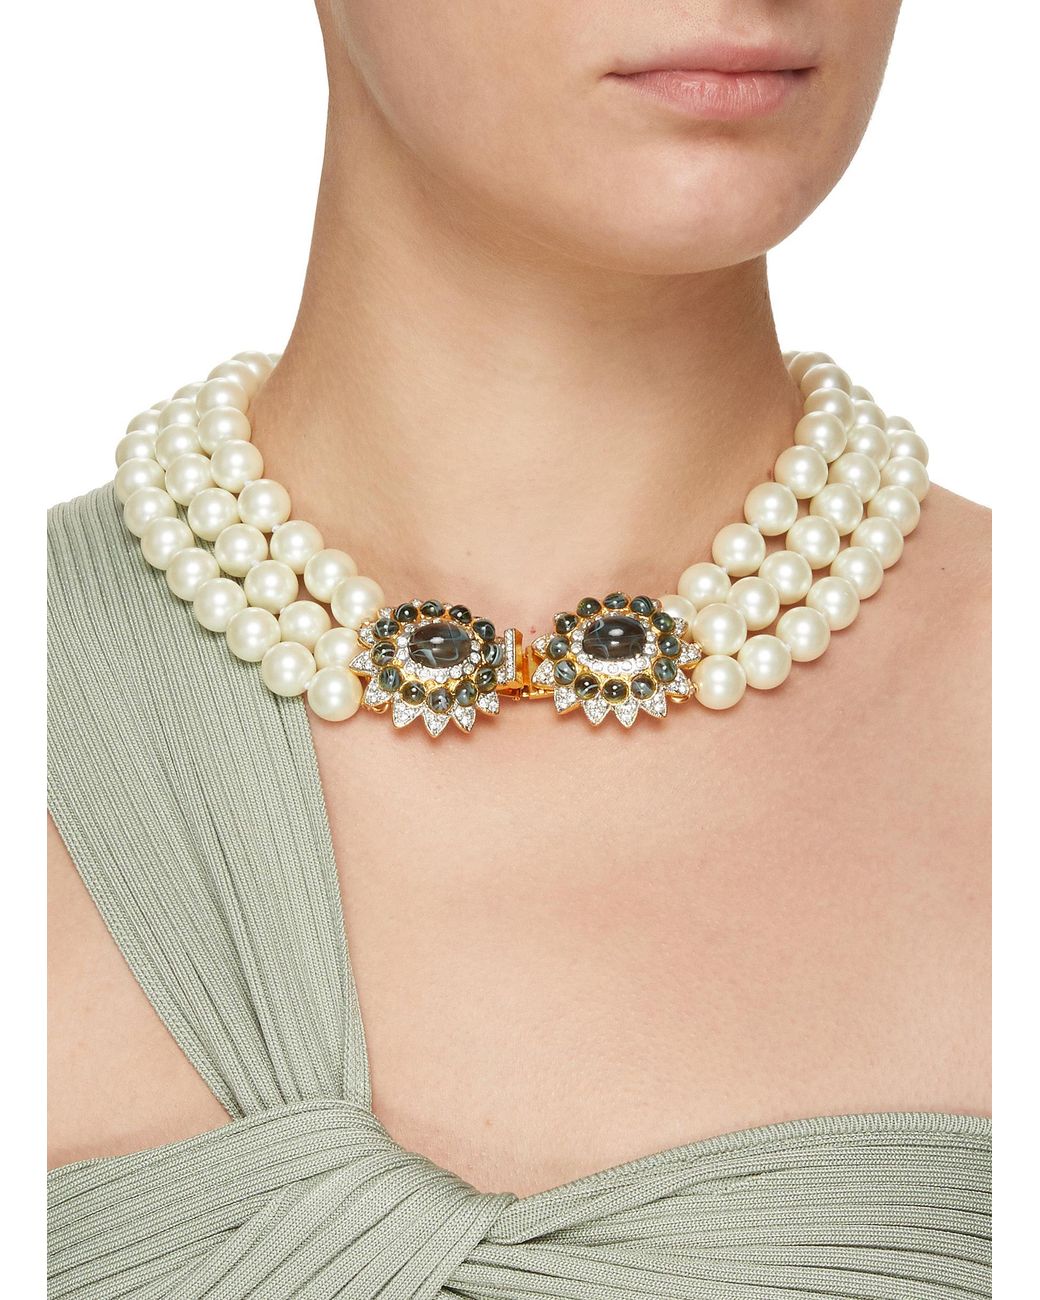 To-die-for pearls donated for UNICEF auction in honor of gala honoree Barbara  Bush - CultureMap Houston